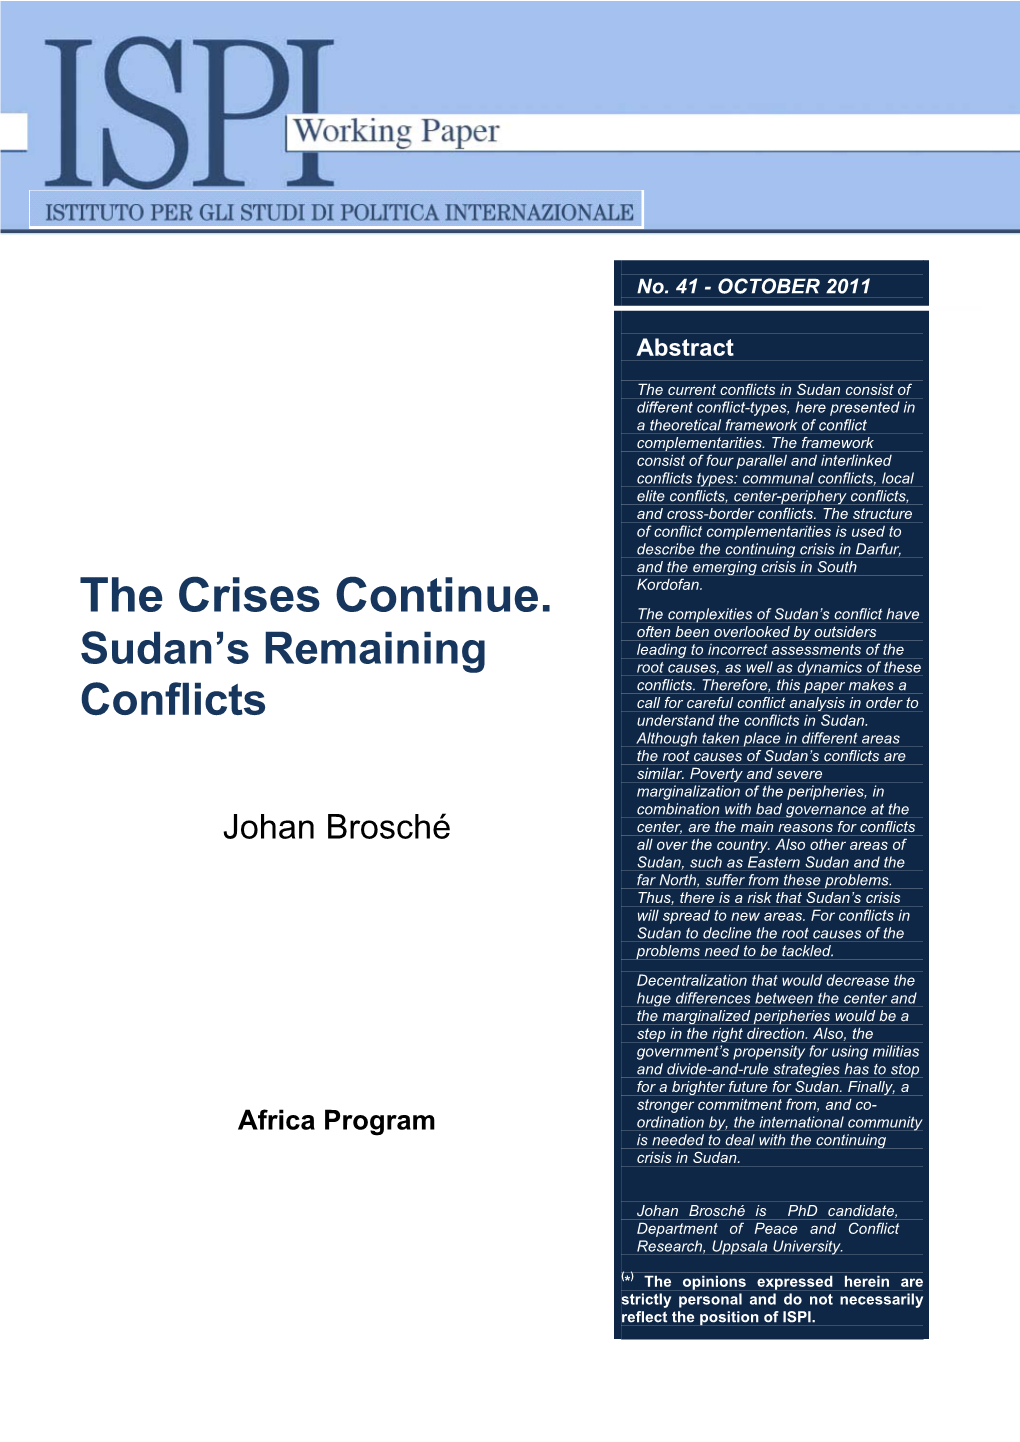 The Crises Continue. Sudan's Remaining Conflicts